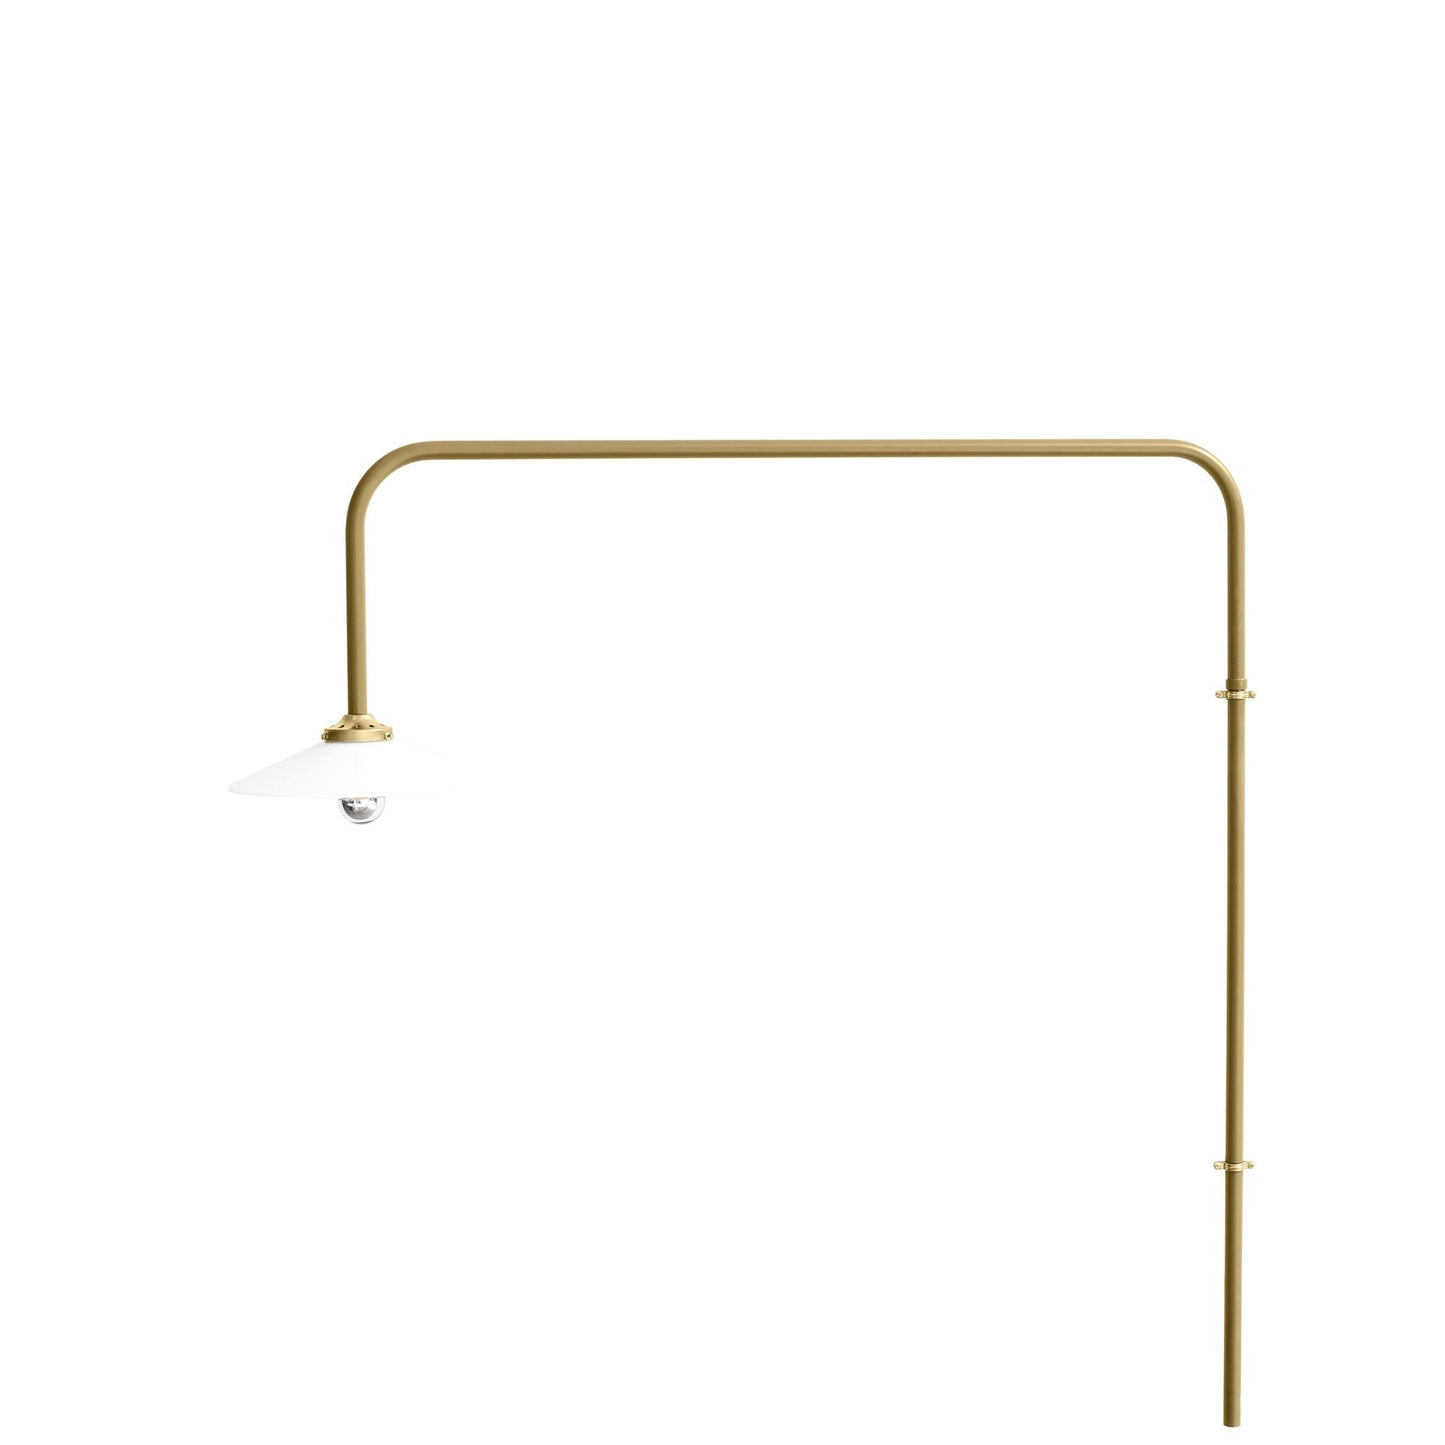 Hanging Lamp N°5 Wall Lamp by Valerie Objects #Brass